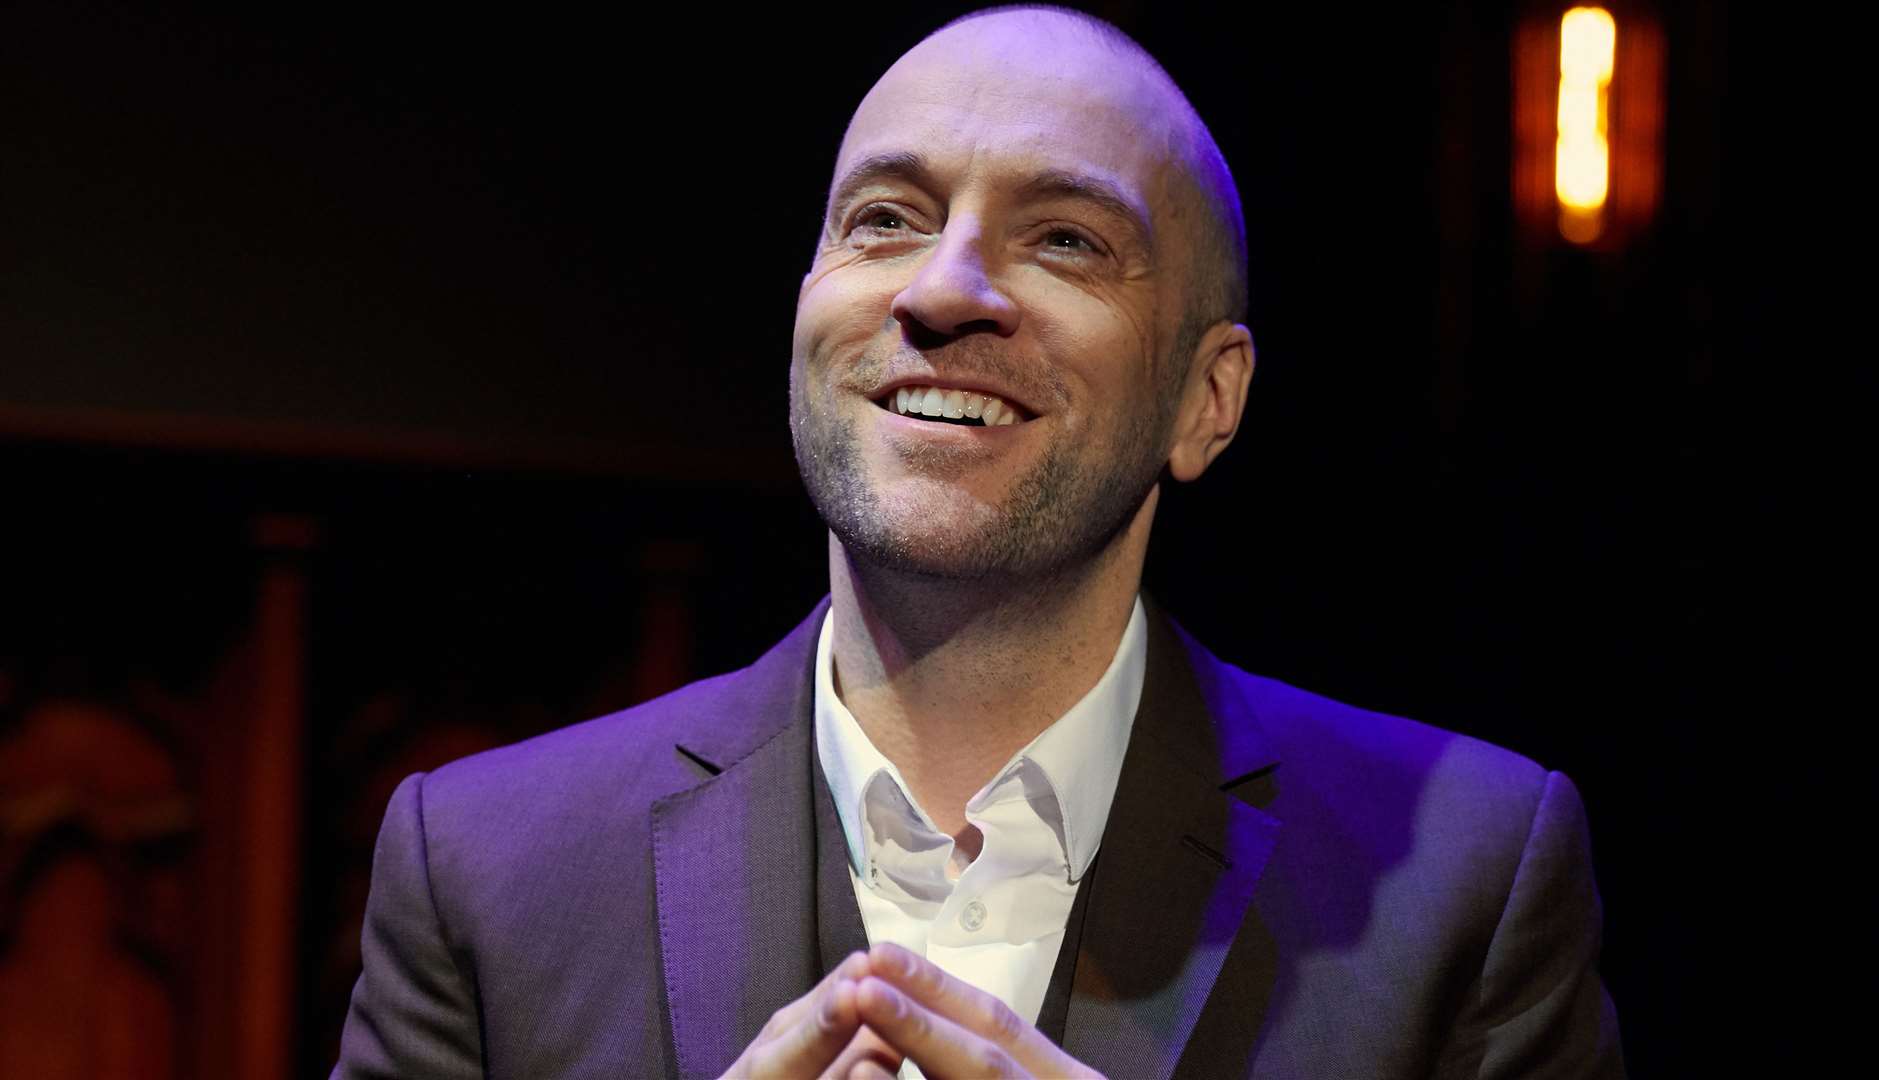 Derren Brown was set to appear this month